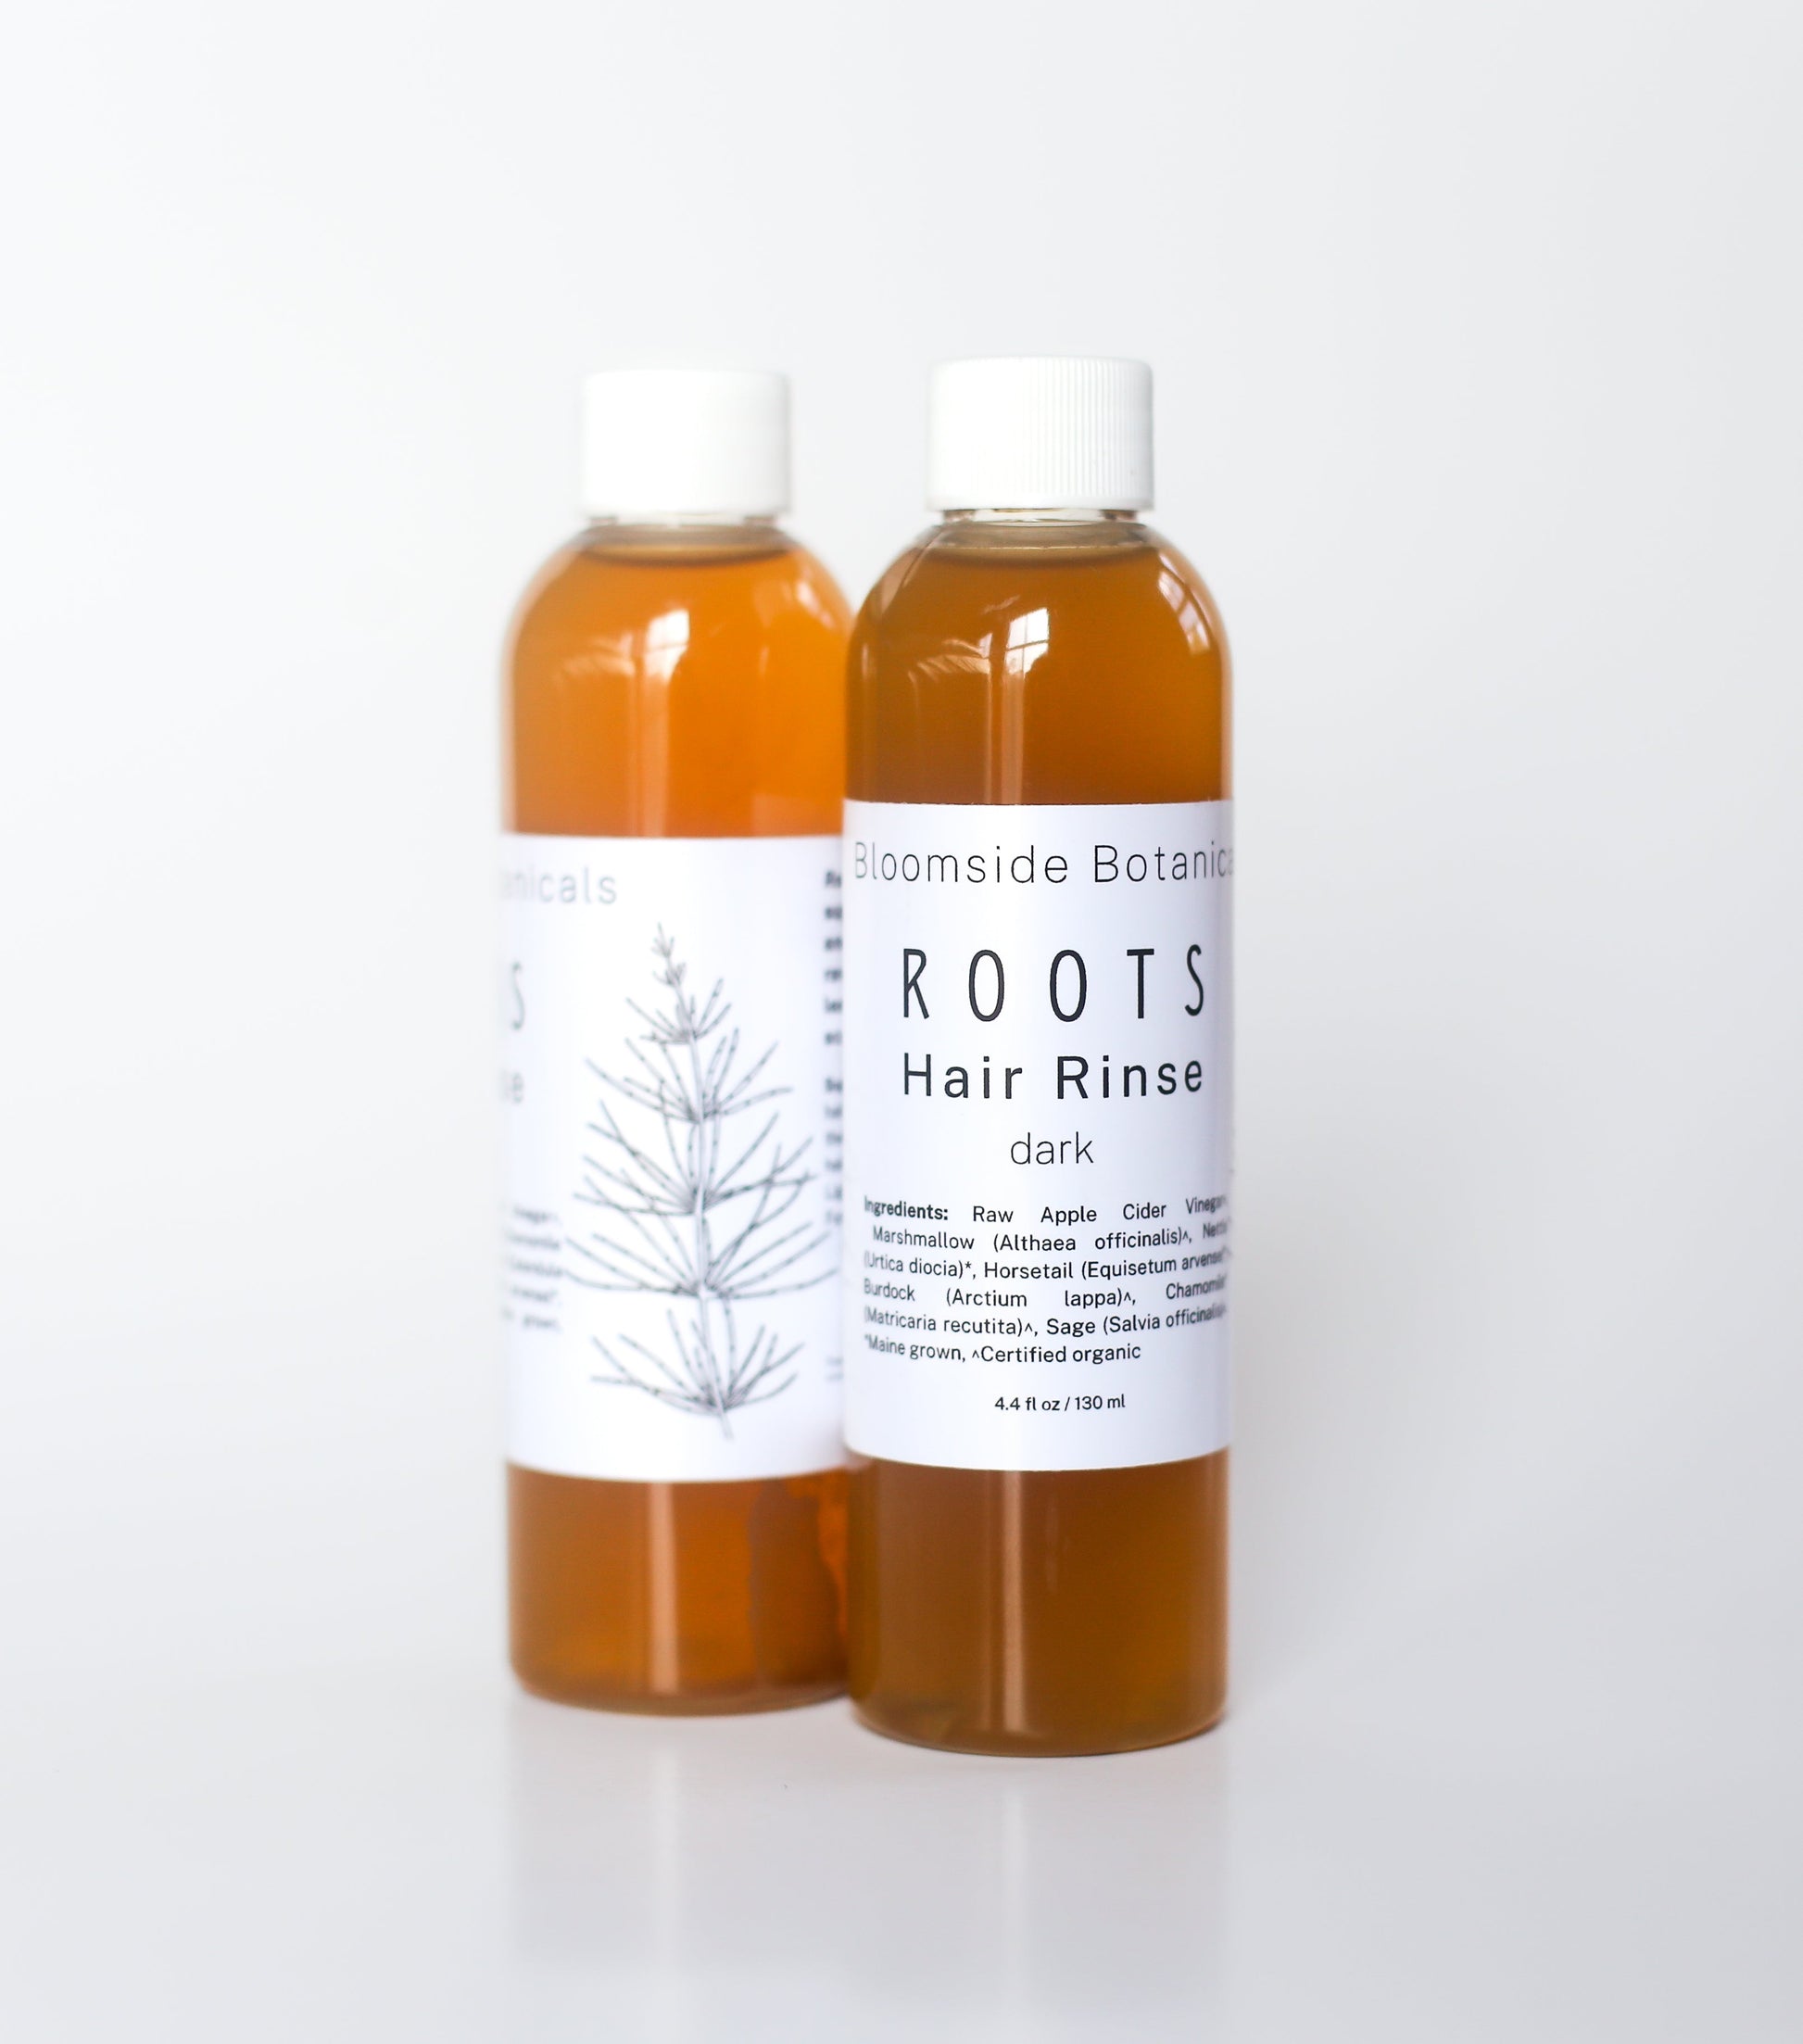 Roots Hair Rinse - Bloomside Botanicals